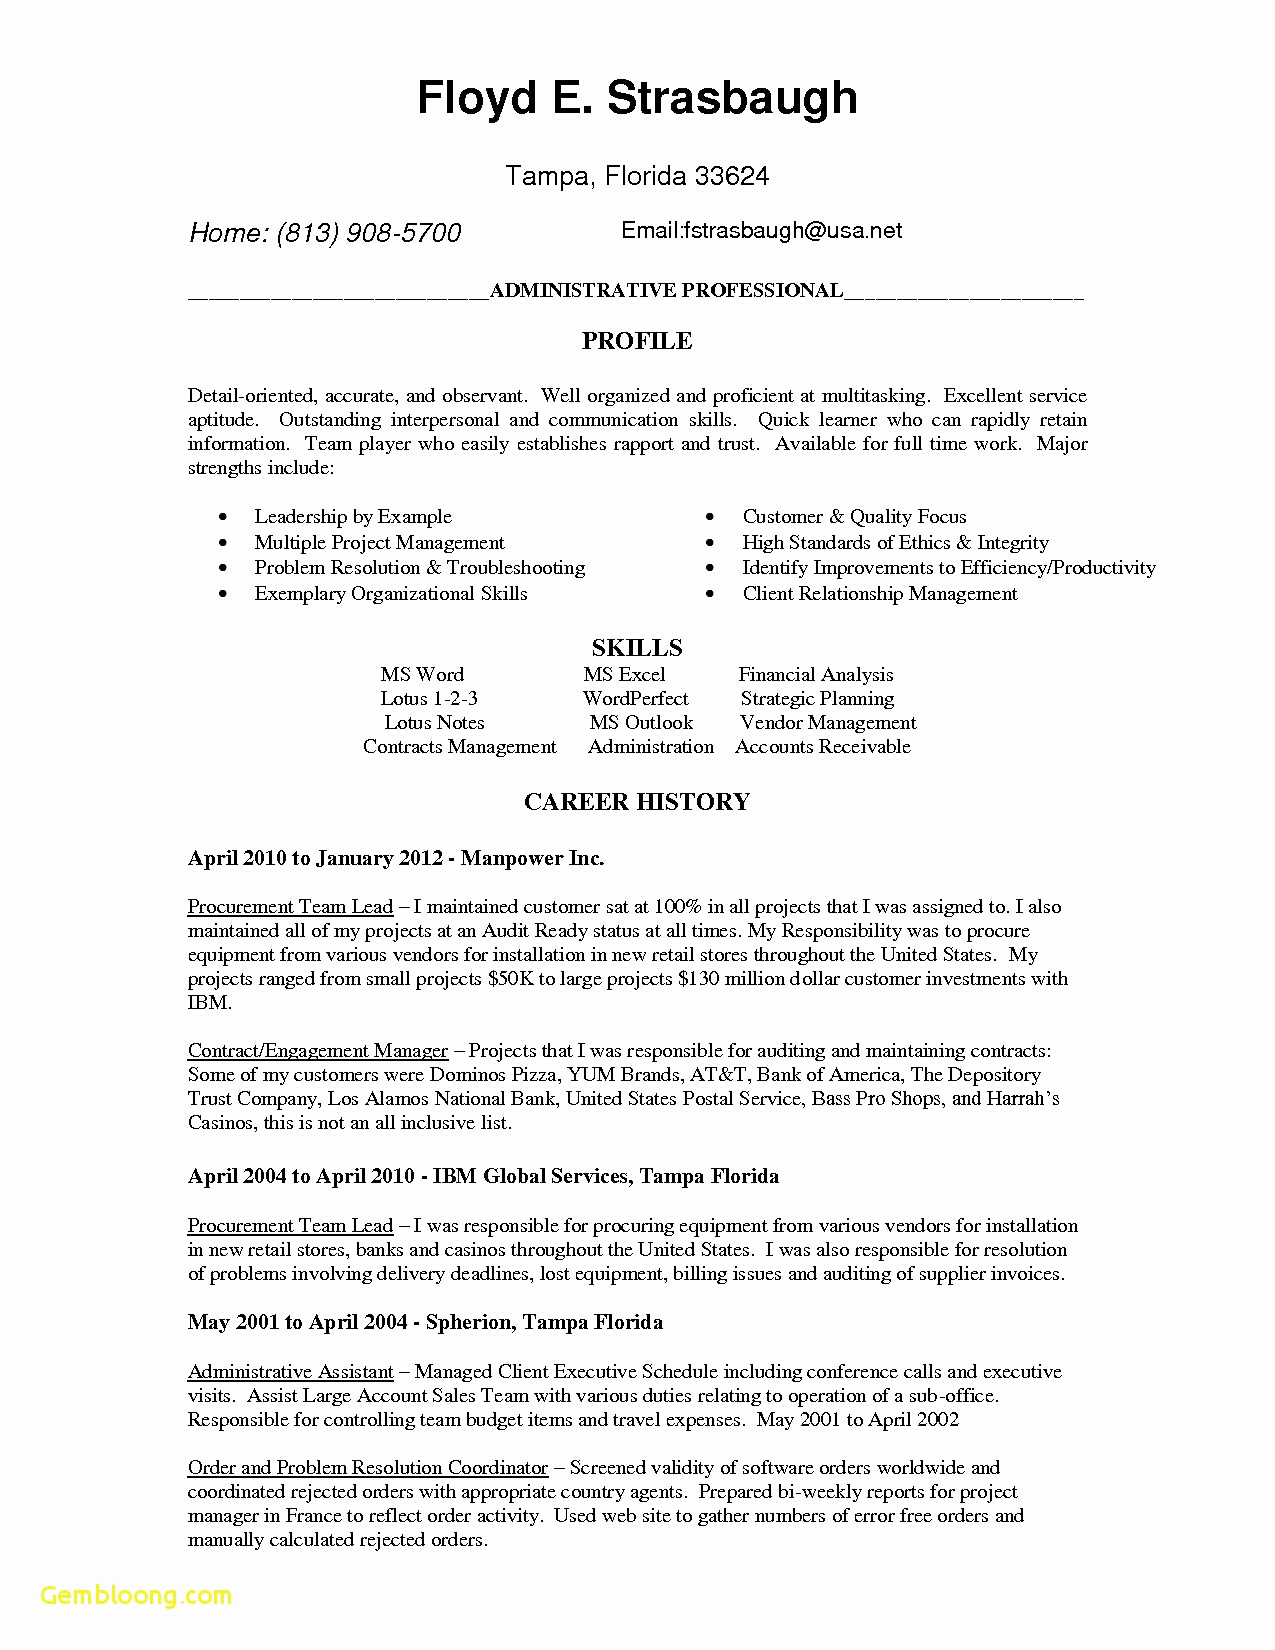 Free Collection Letter Template - Example Curriculum Vitae Best Fresh Resume Cover Letter